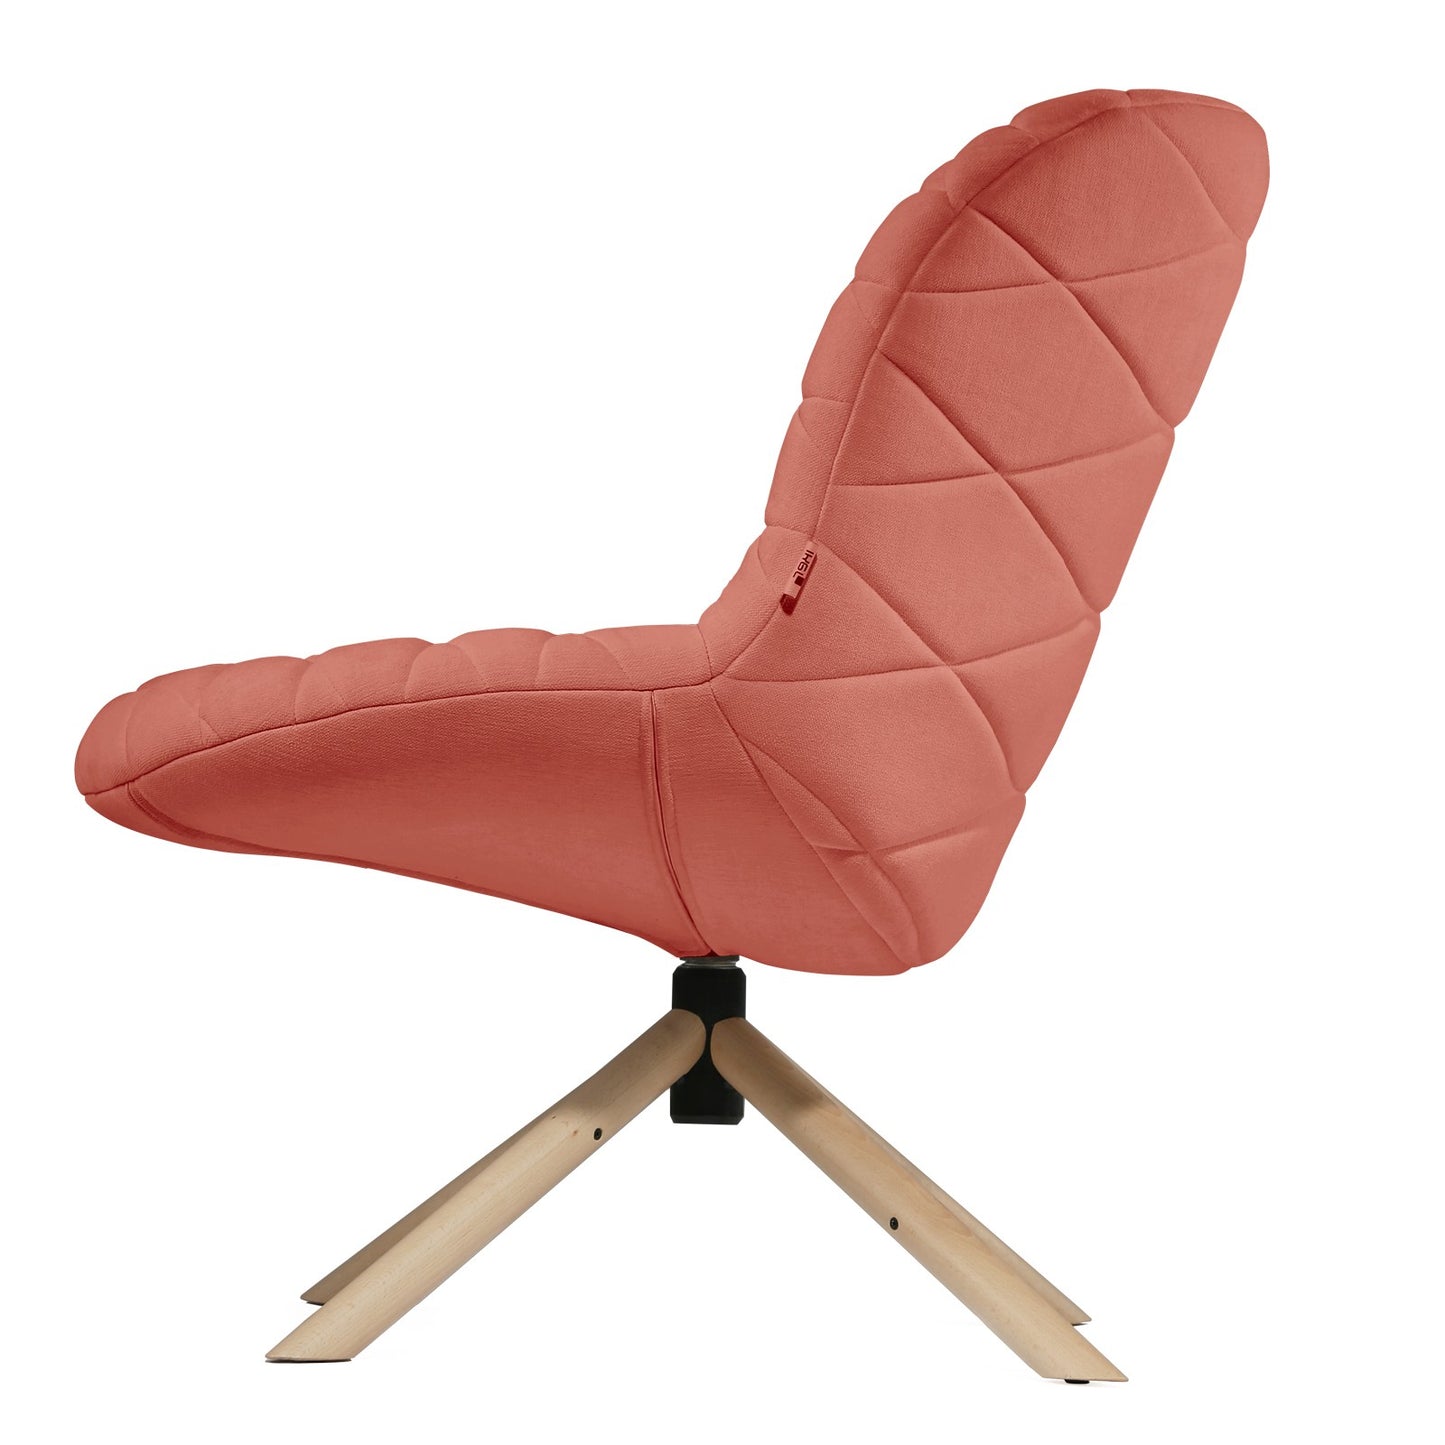 Lounge chair Mannequin Lounge 01 - Coral